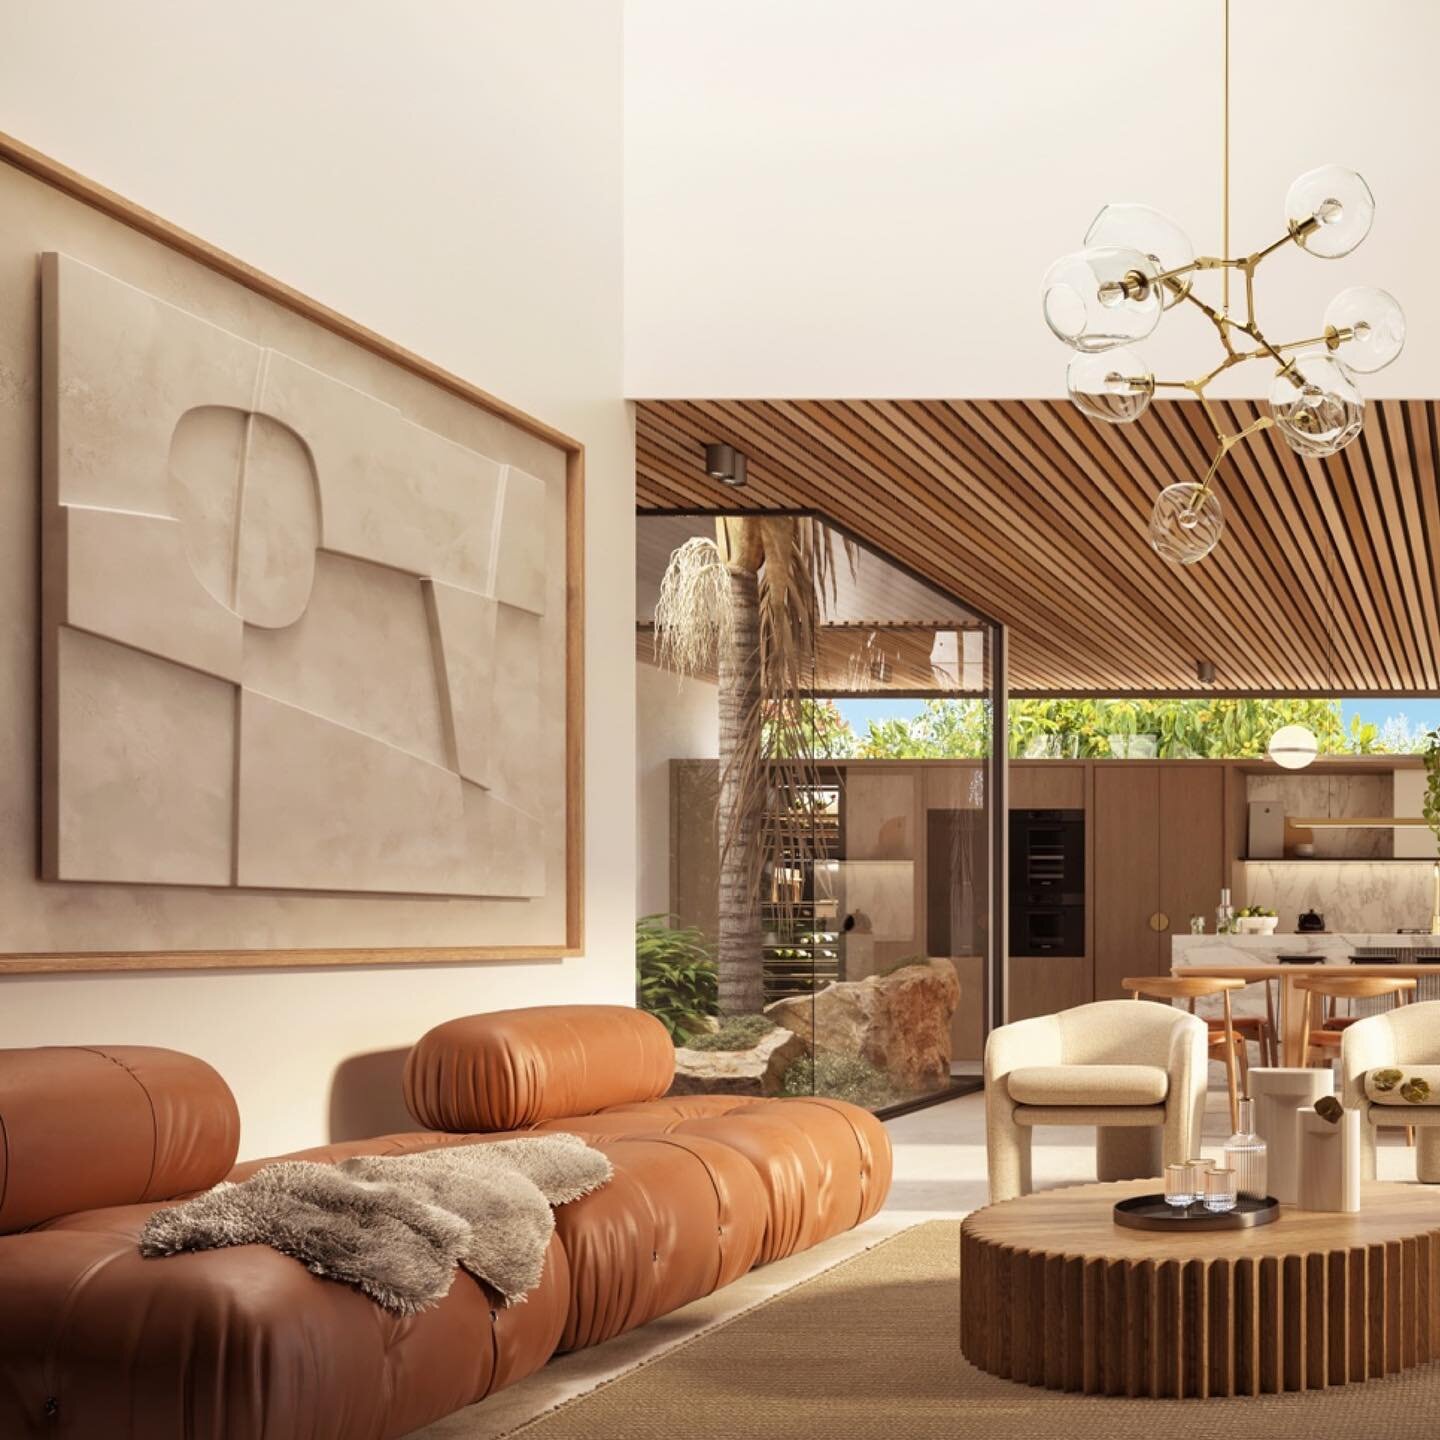 12 Binaville Ave, Burraneer

Earthy tones and natural elements create a calming ambience in this luxurious, light-filled living area. 

Construction has officially commenced on our award-winning duplex project - keep an eye on our stories for further